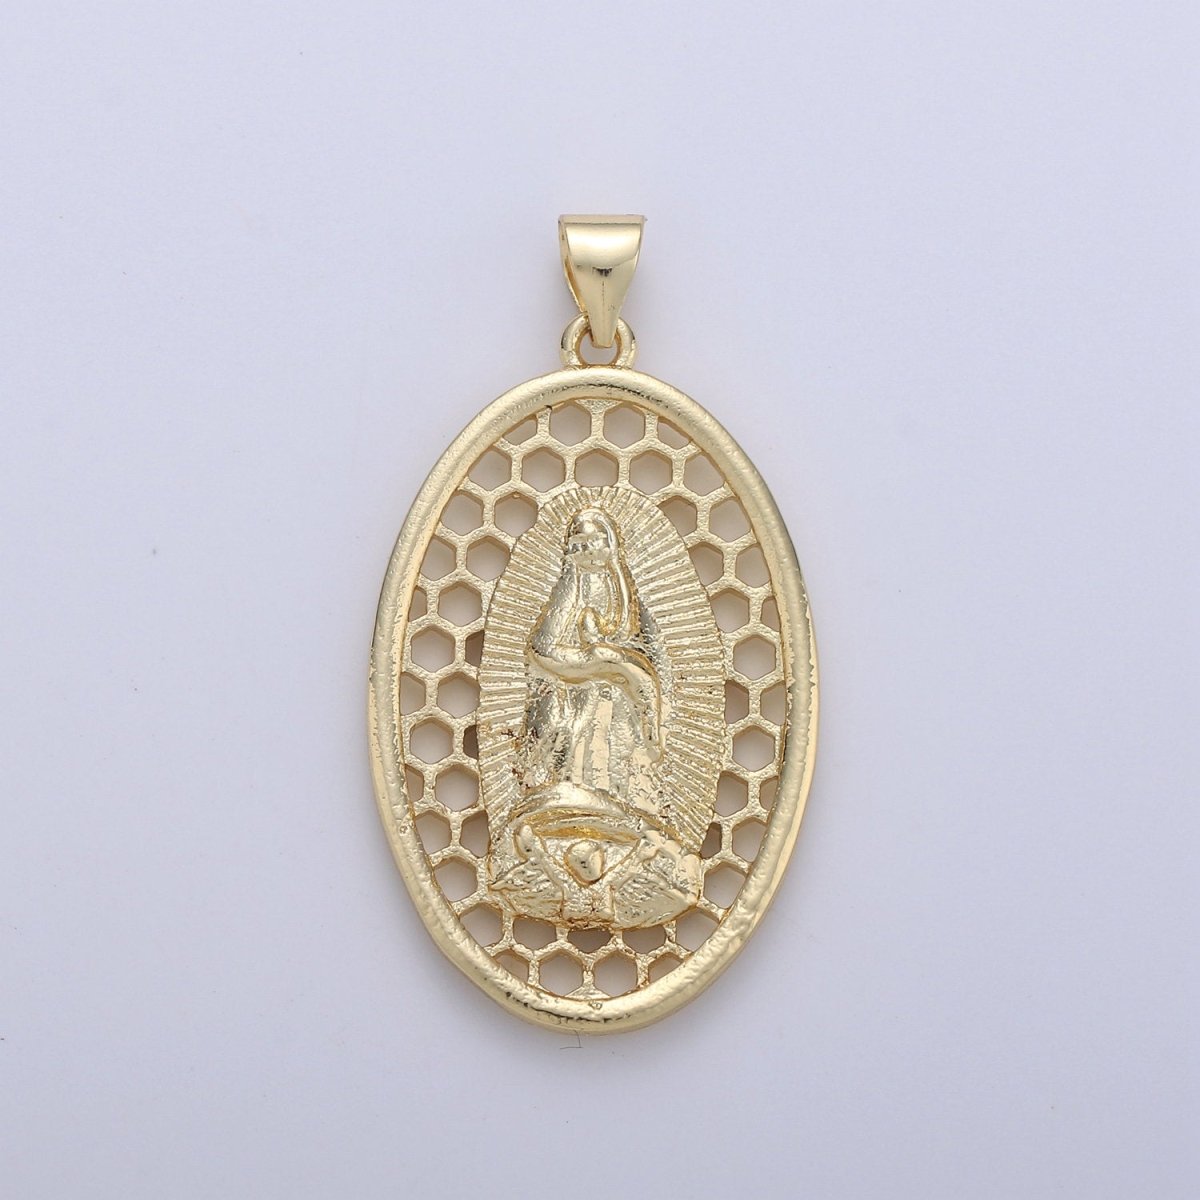 Oval Charm 24k Gold Filled Virgin Mary Pendant, Lady Guadalupe Oval Charm, Mother of Jesus Medallion Pendant Necklace I-644 - DLUXCA